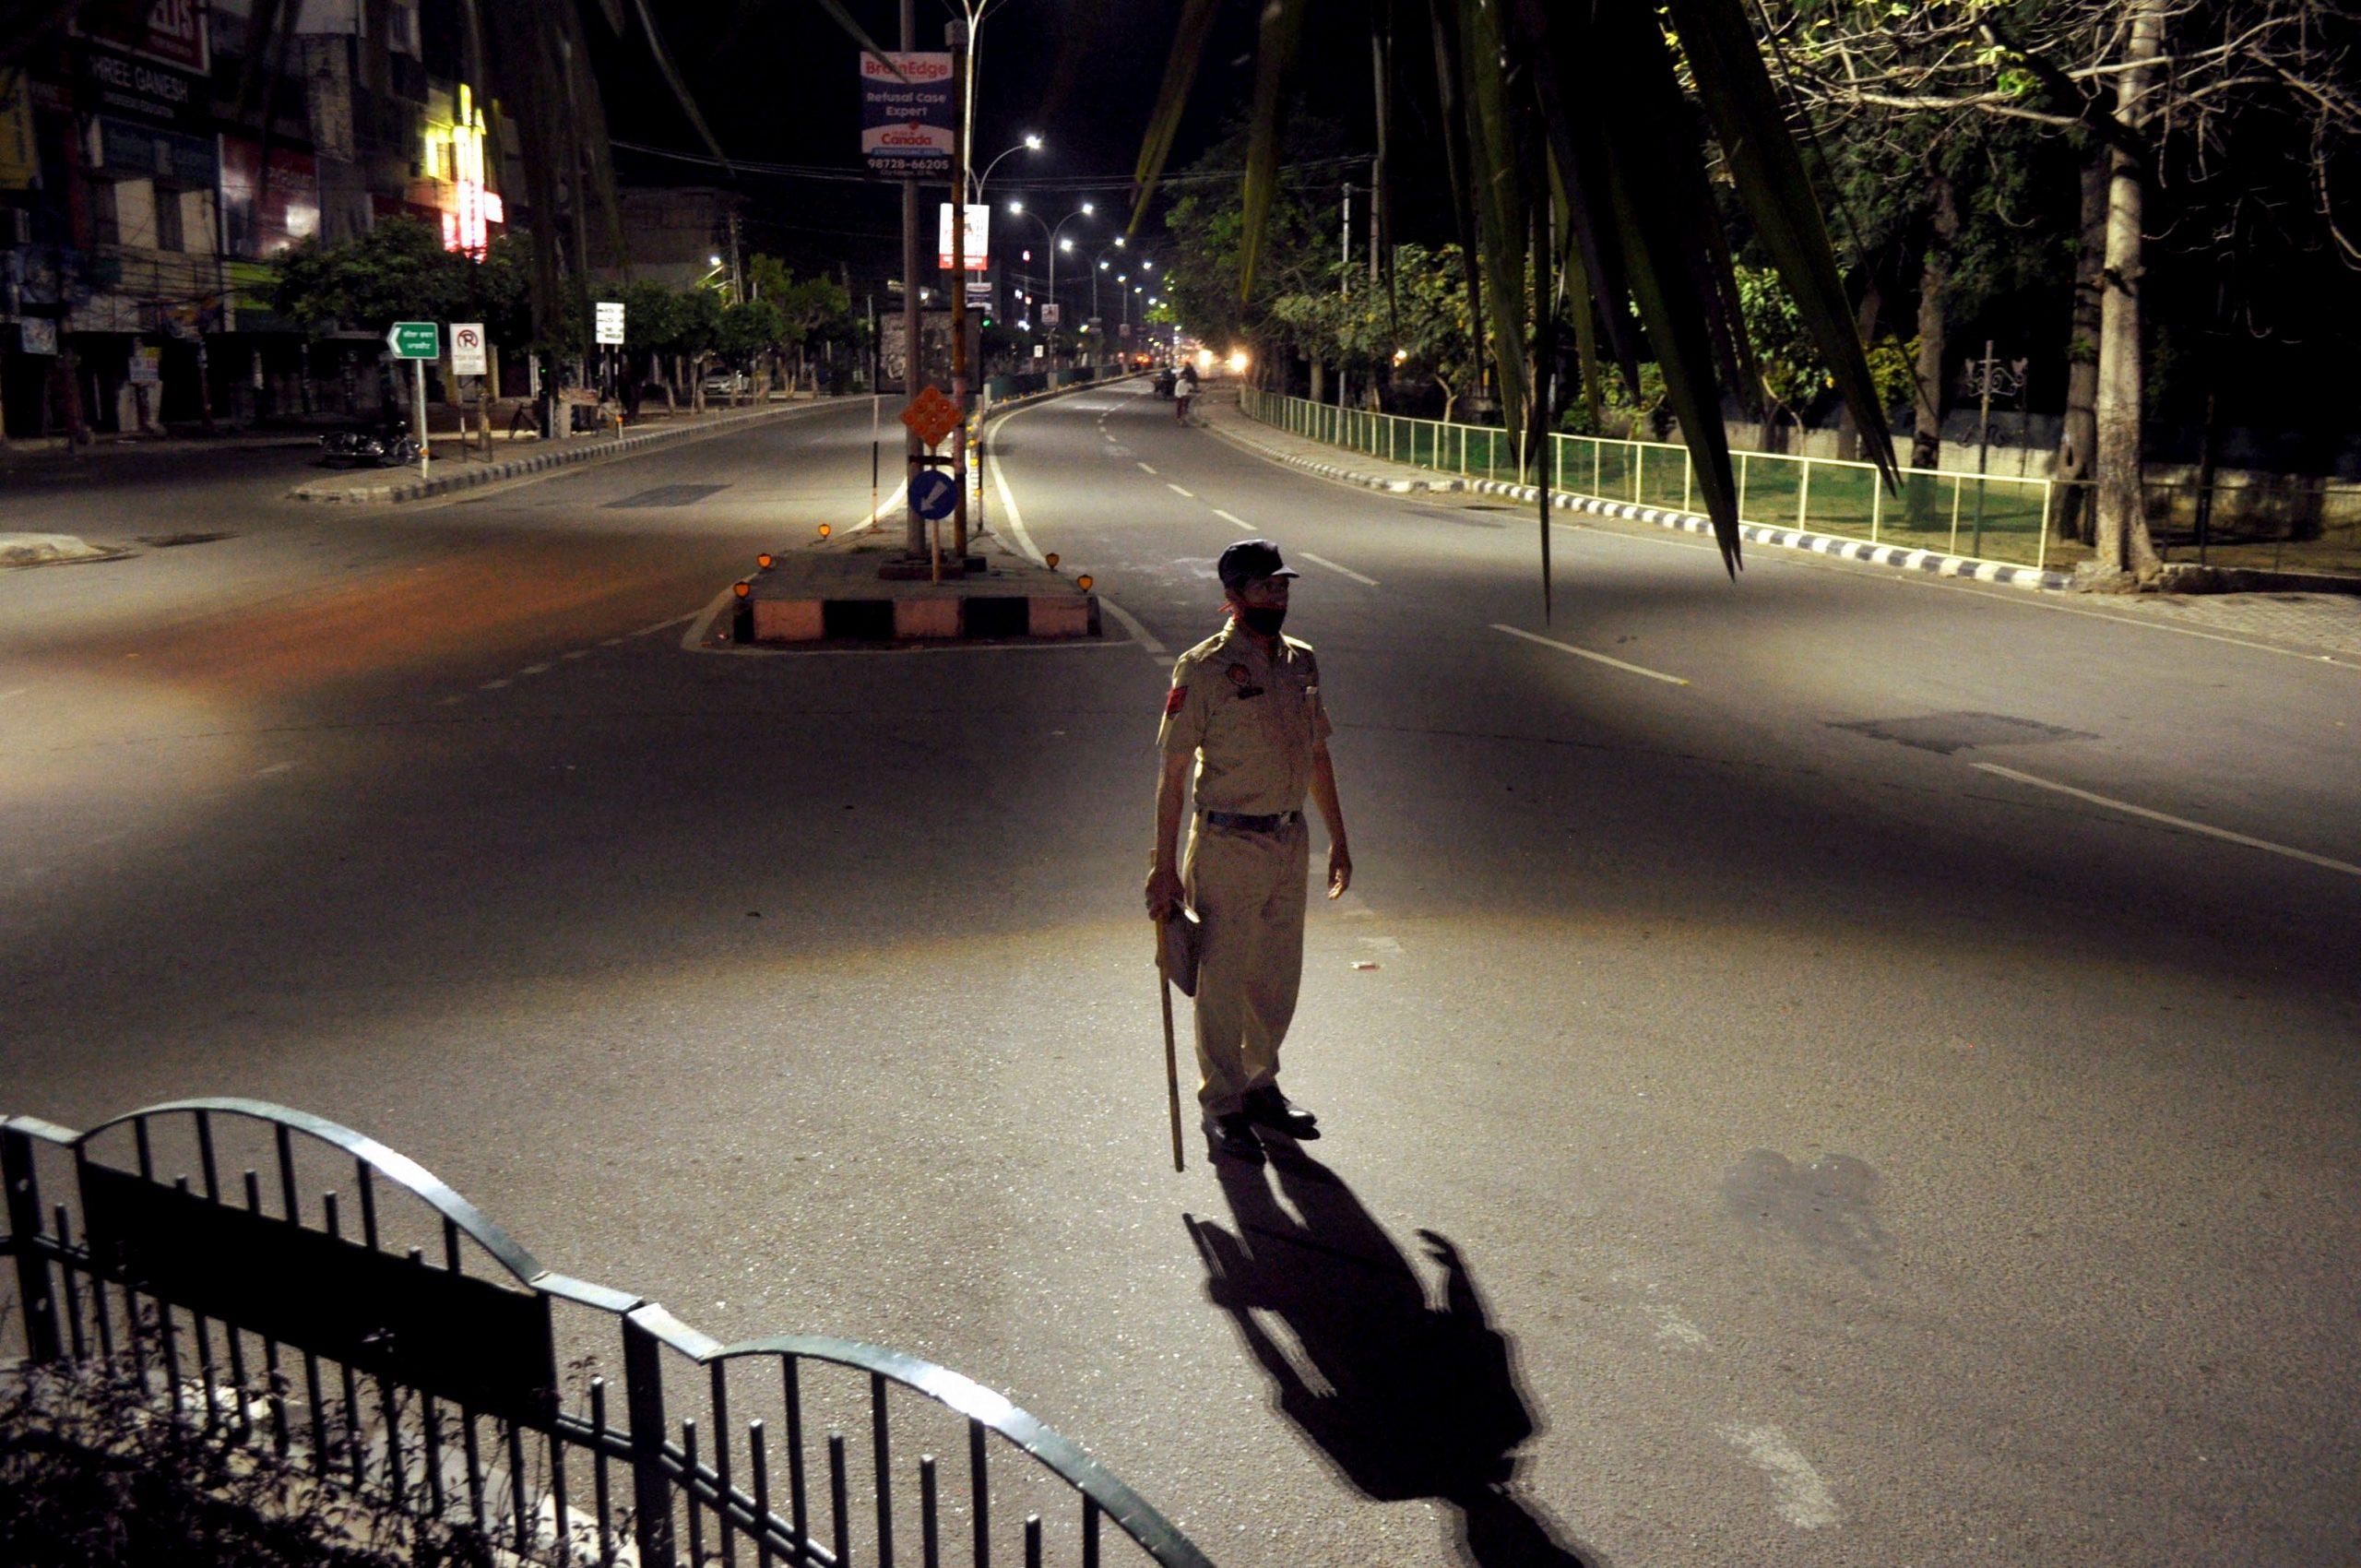 Night curfew from 10pm to 5am: What changes for Delhi people